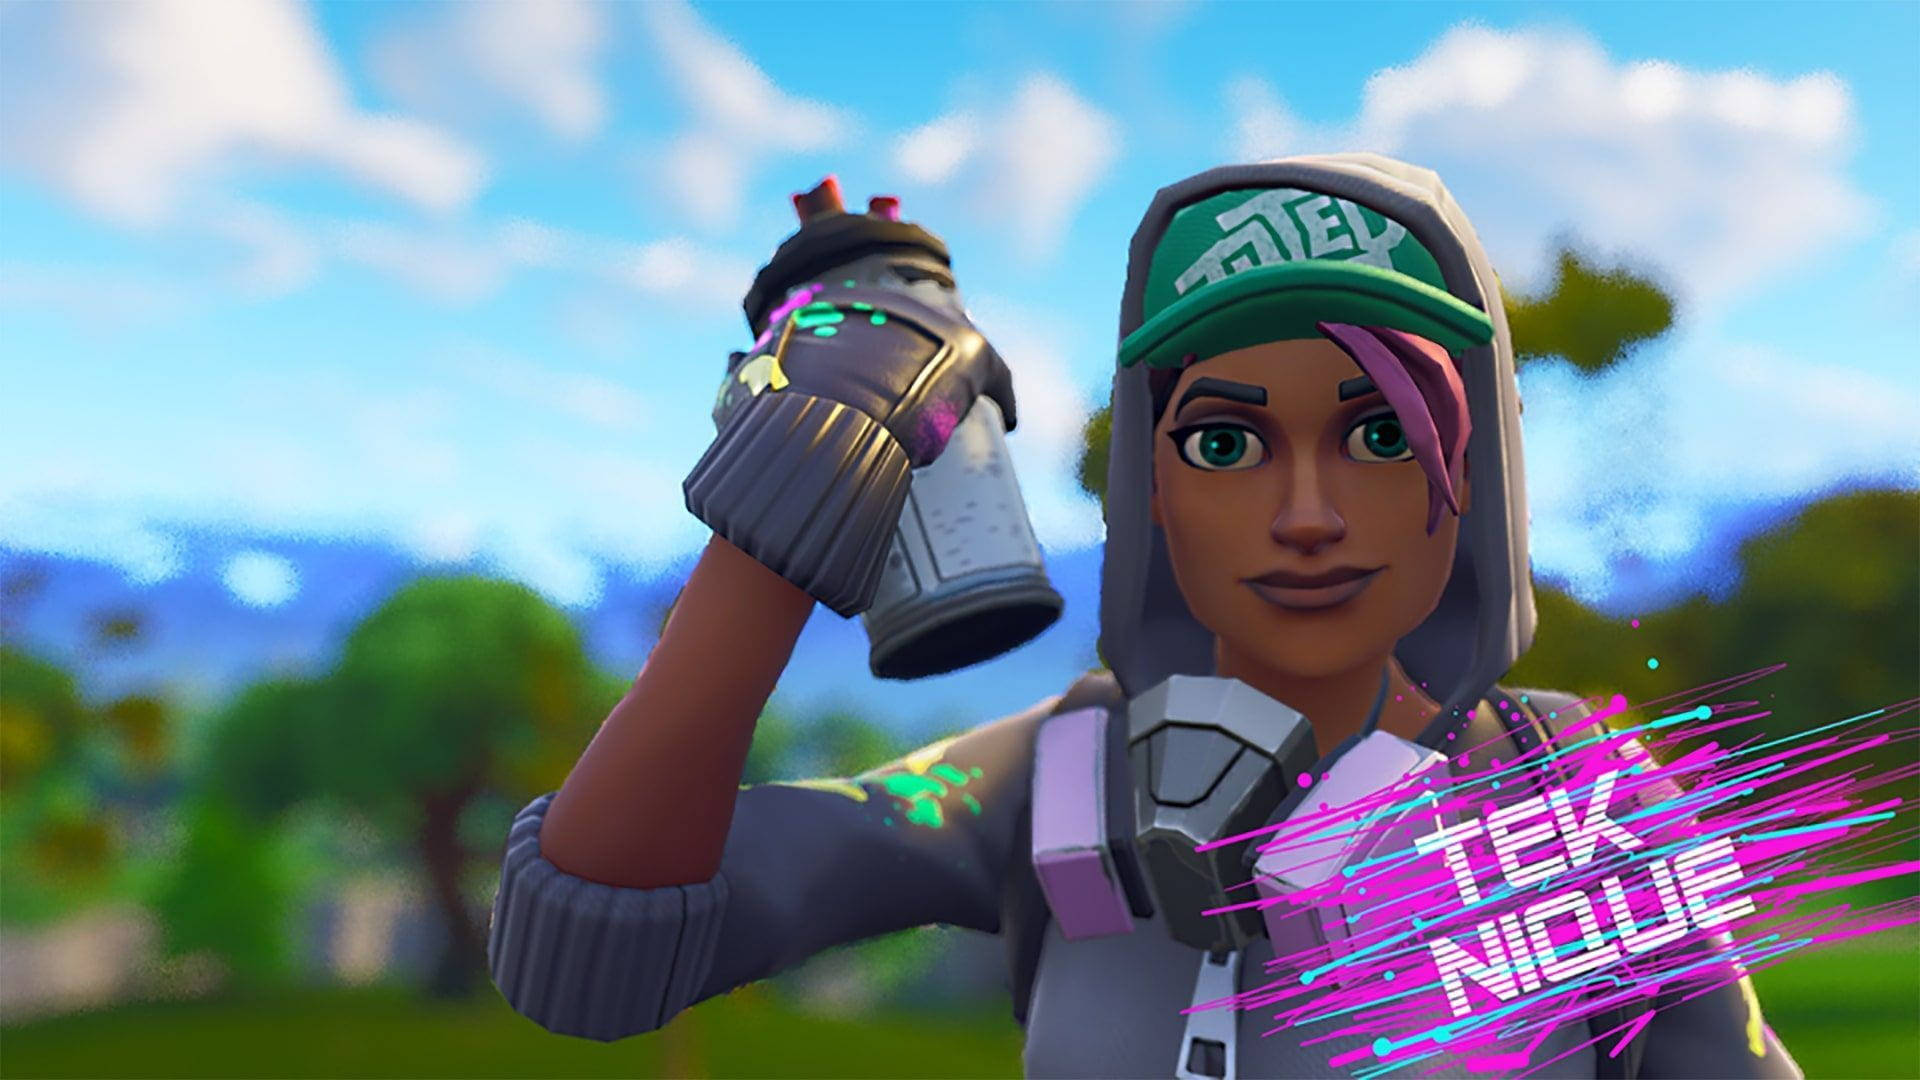 The Fortnite Girl Is Ready to Take the Online Gaming World by Storm Wallpaper